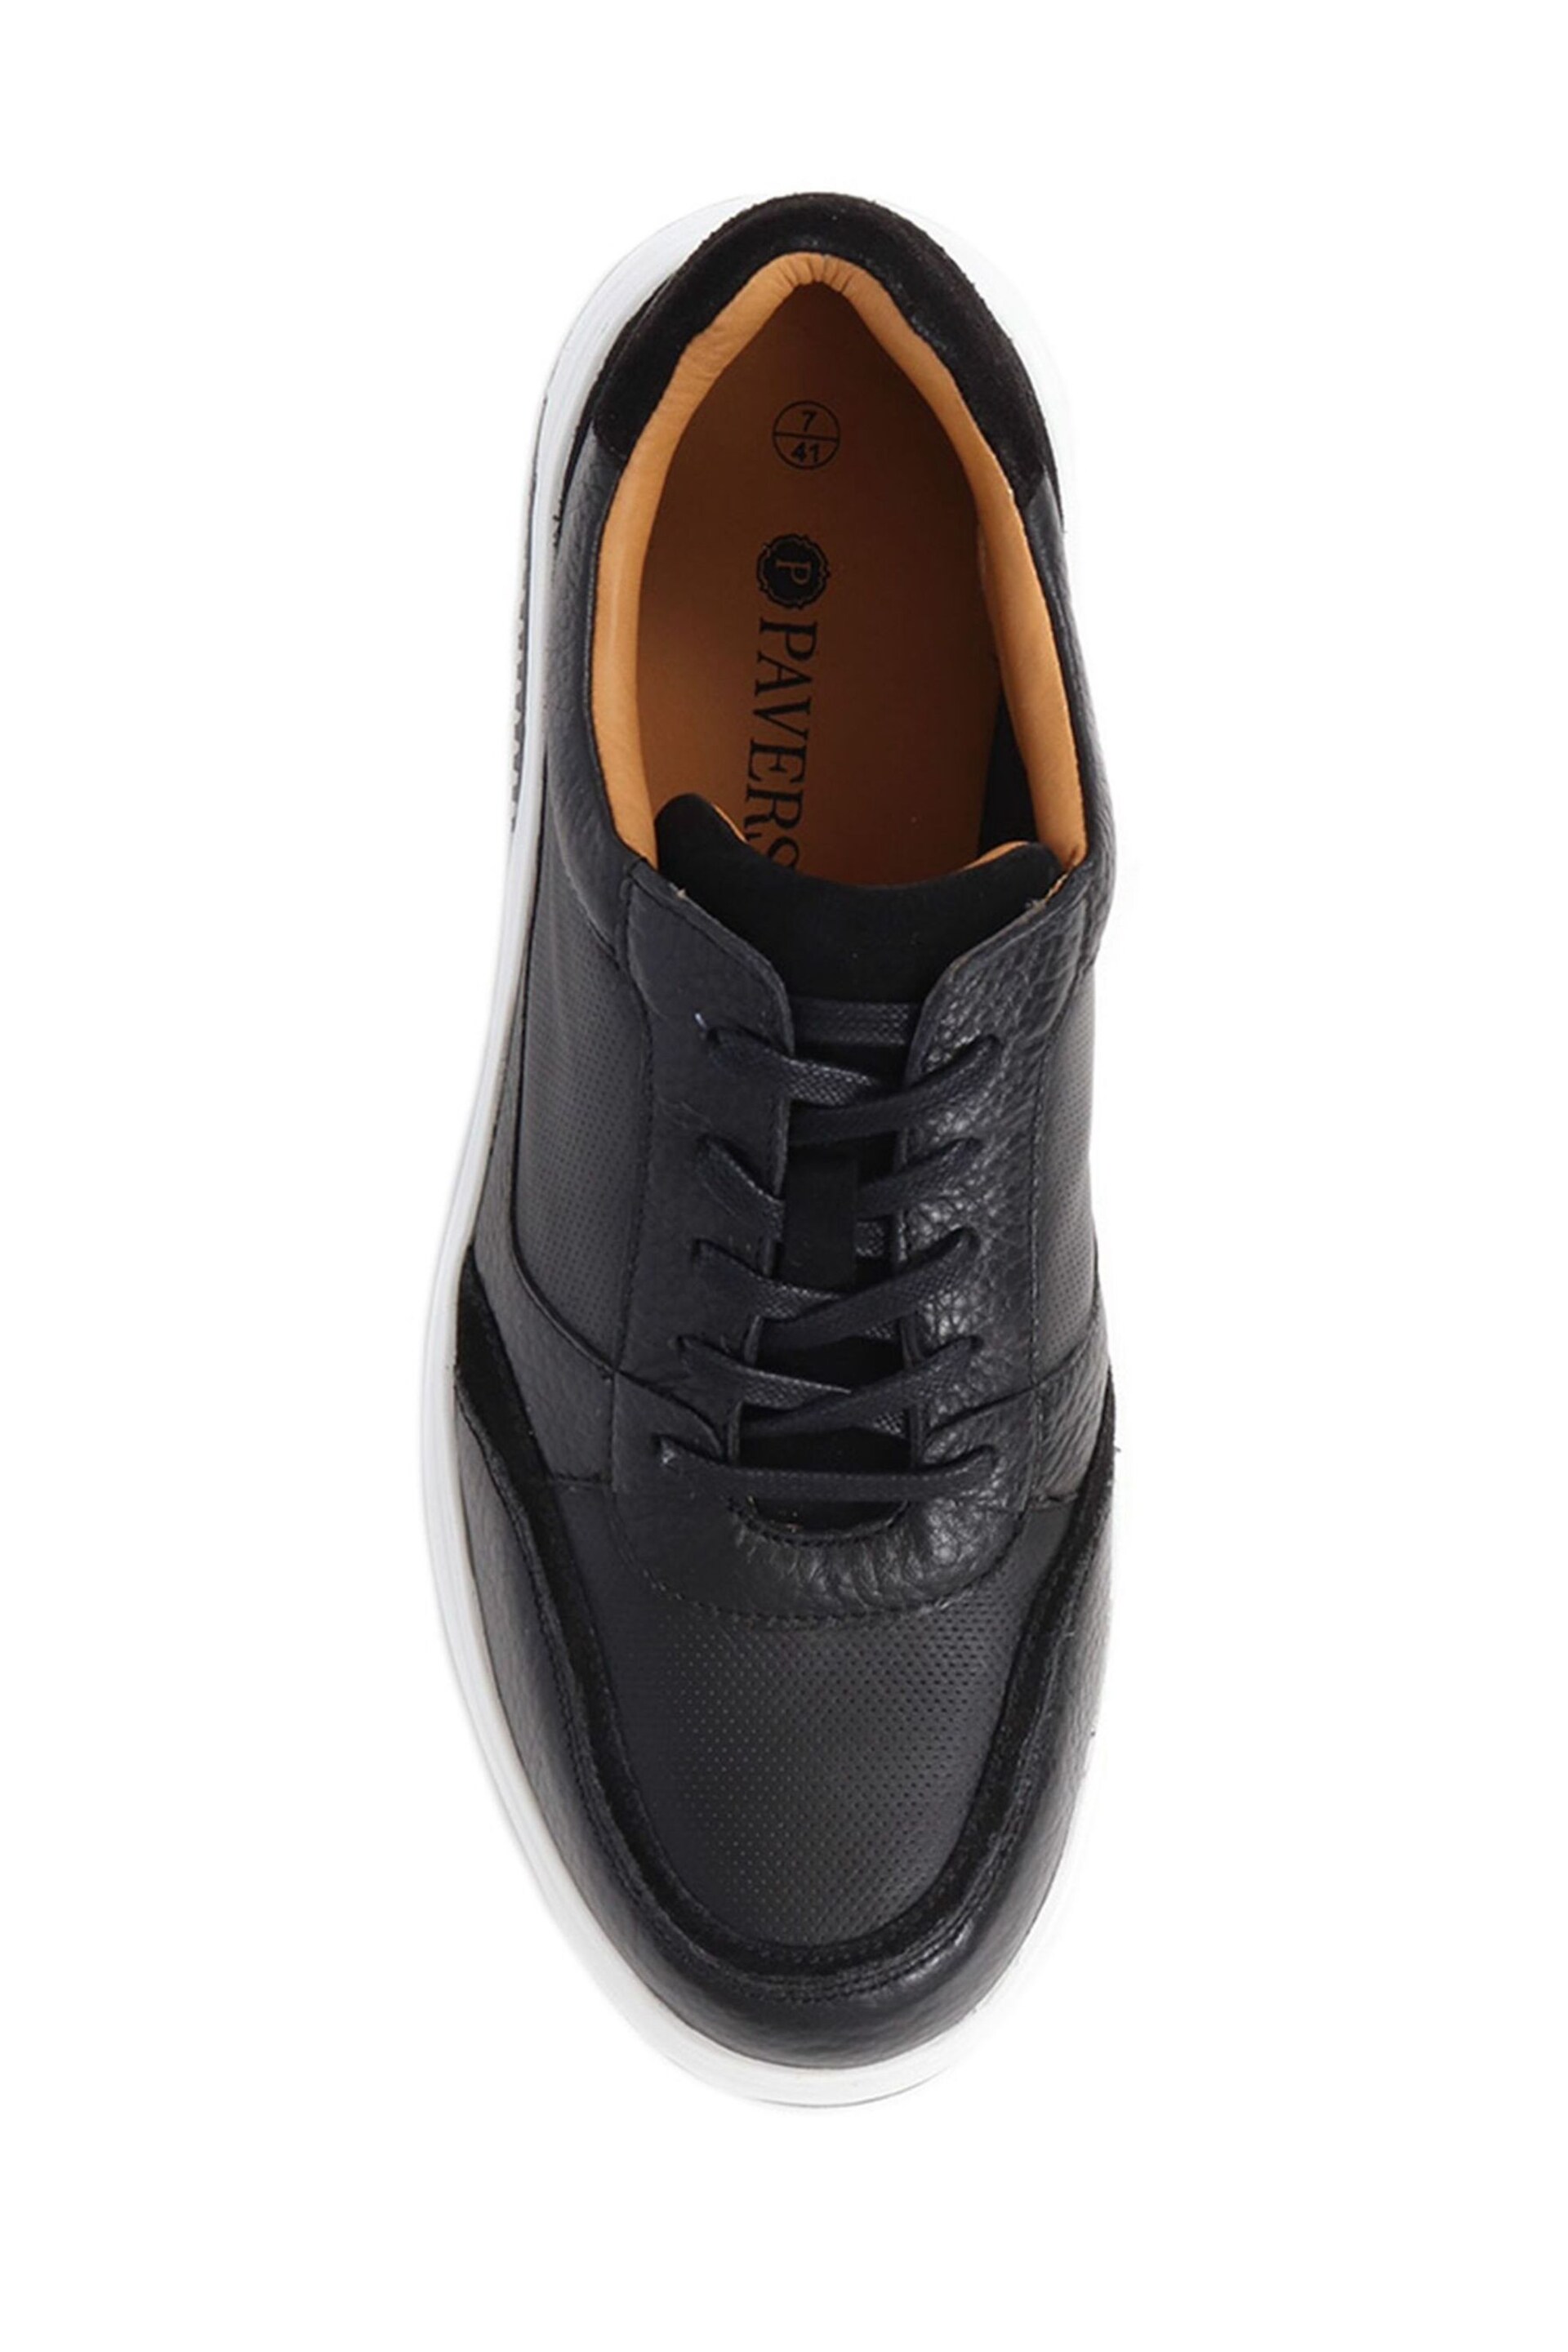 Pavers Black Lace-Up Leather Trainers - Image 3 of 5